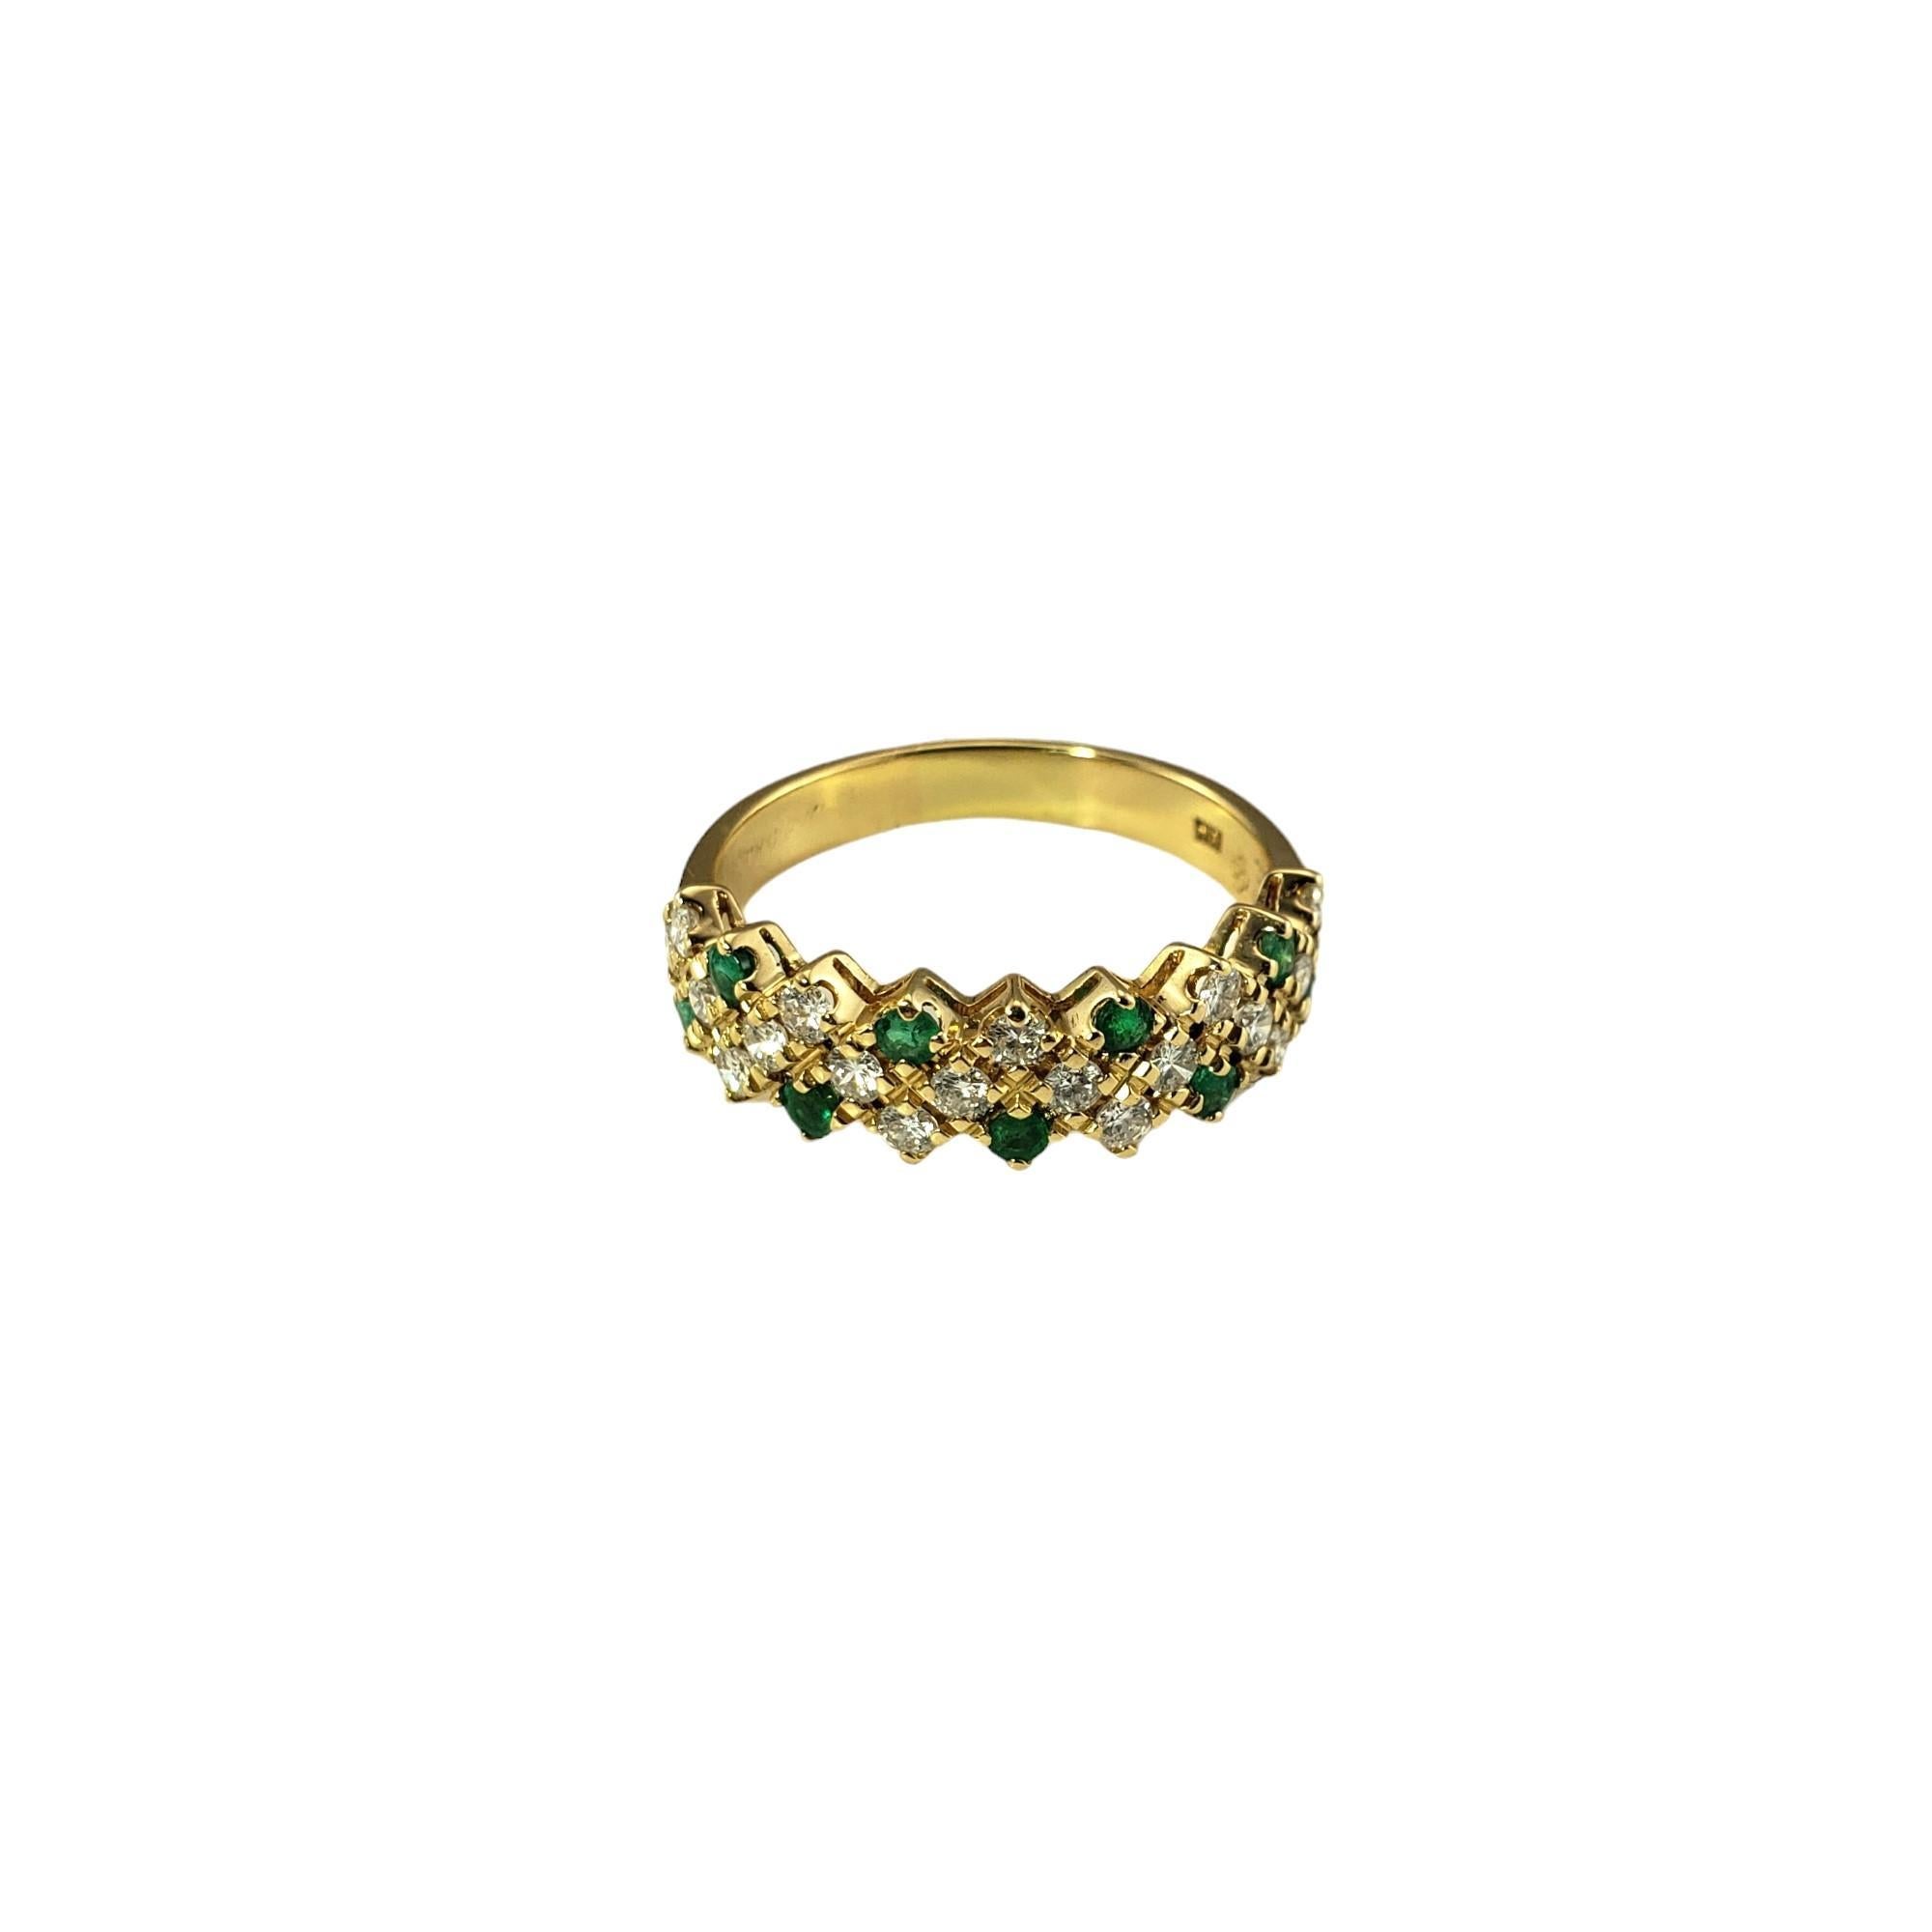 18K Yellow Gold Emerald and Diamond Ring Size 8.75 JAGi Certified-

This lovely ring features nineteen round brilliant cut diamonds and eight round cut natural emeralds set in classic 18K yellow gold.  Width:  6 mm.  Shank: 3 mm.

Total emerald